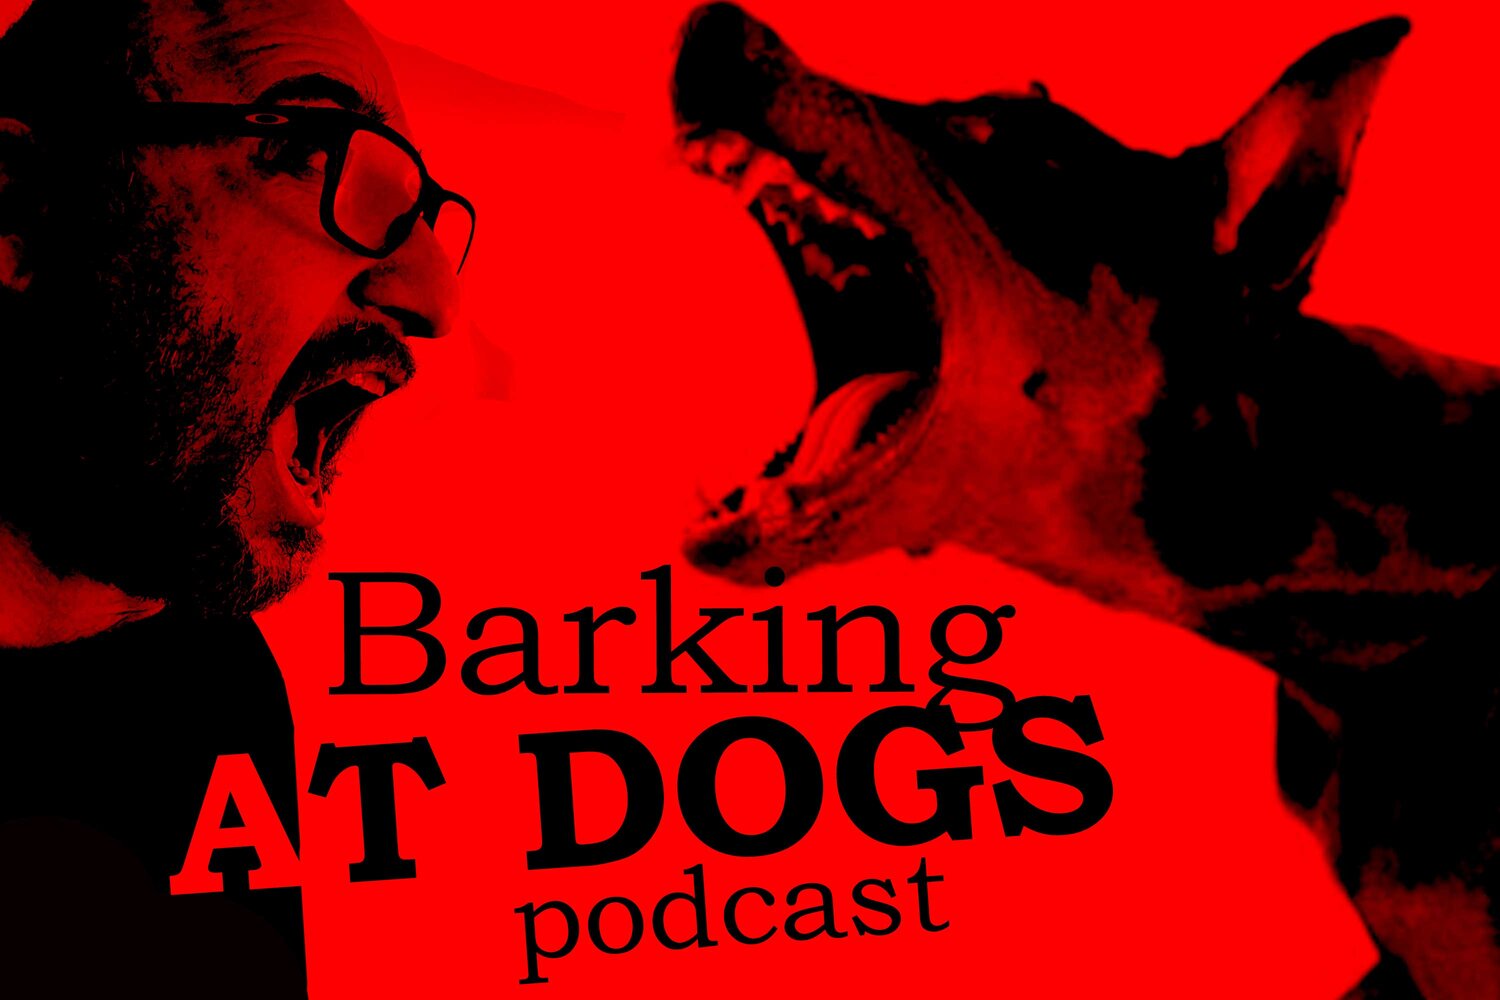 Barking at Dogs